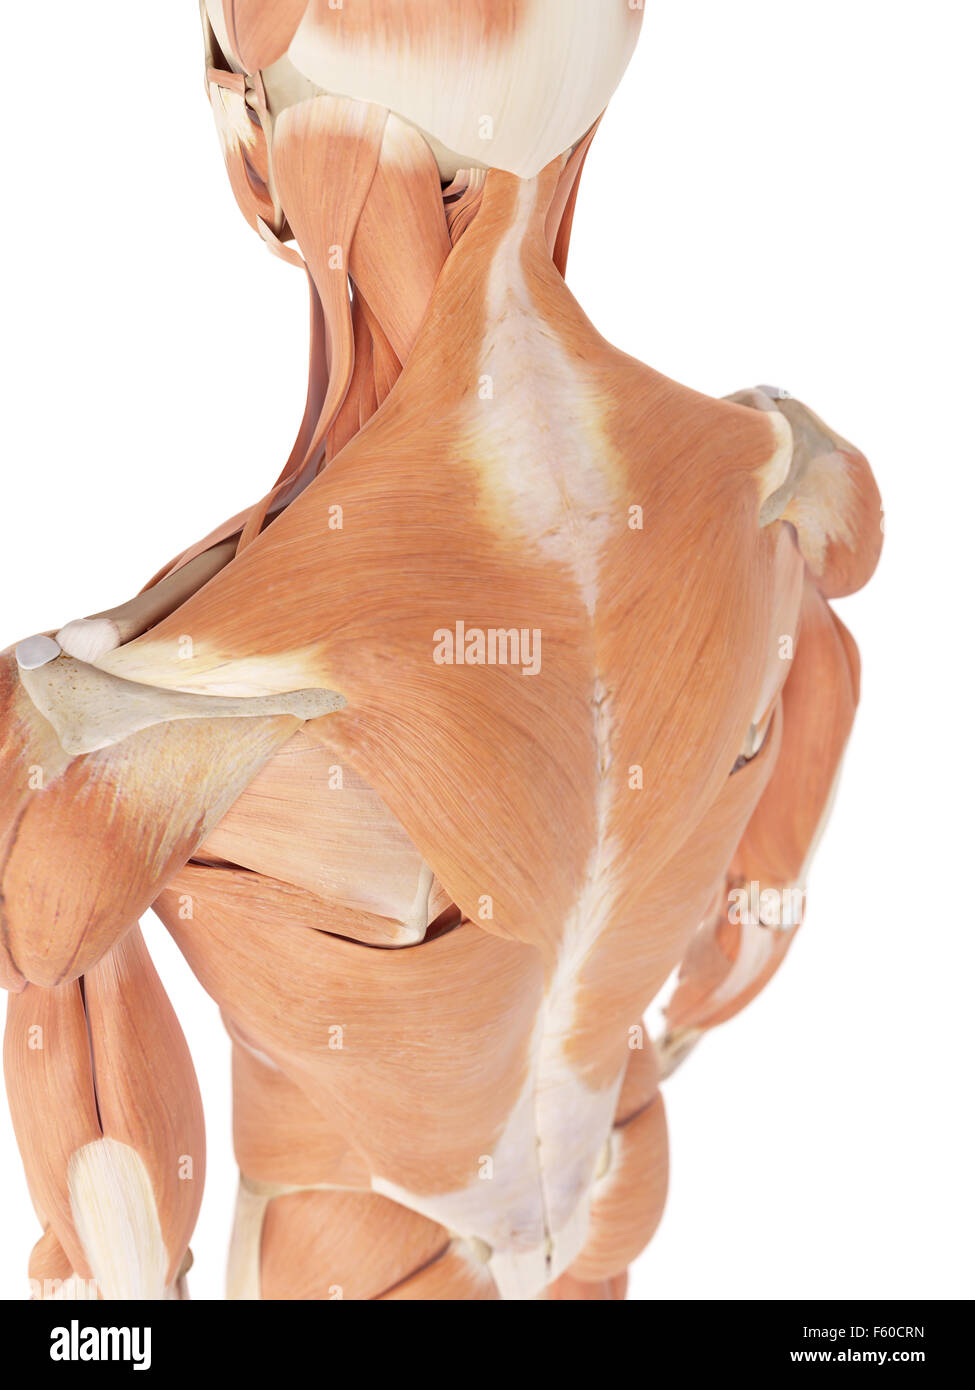 medical accurate illustration of the back muscles Stock Photo